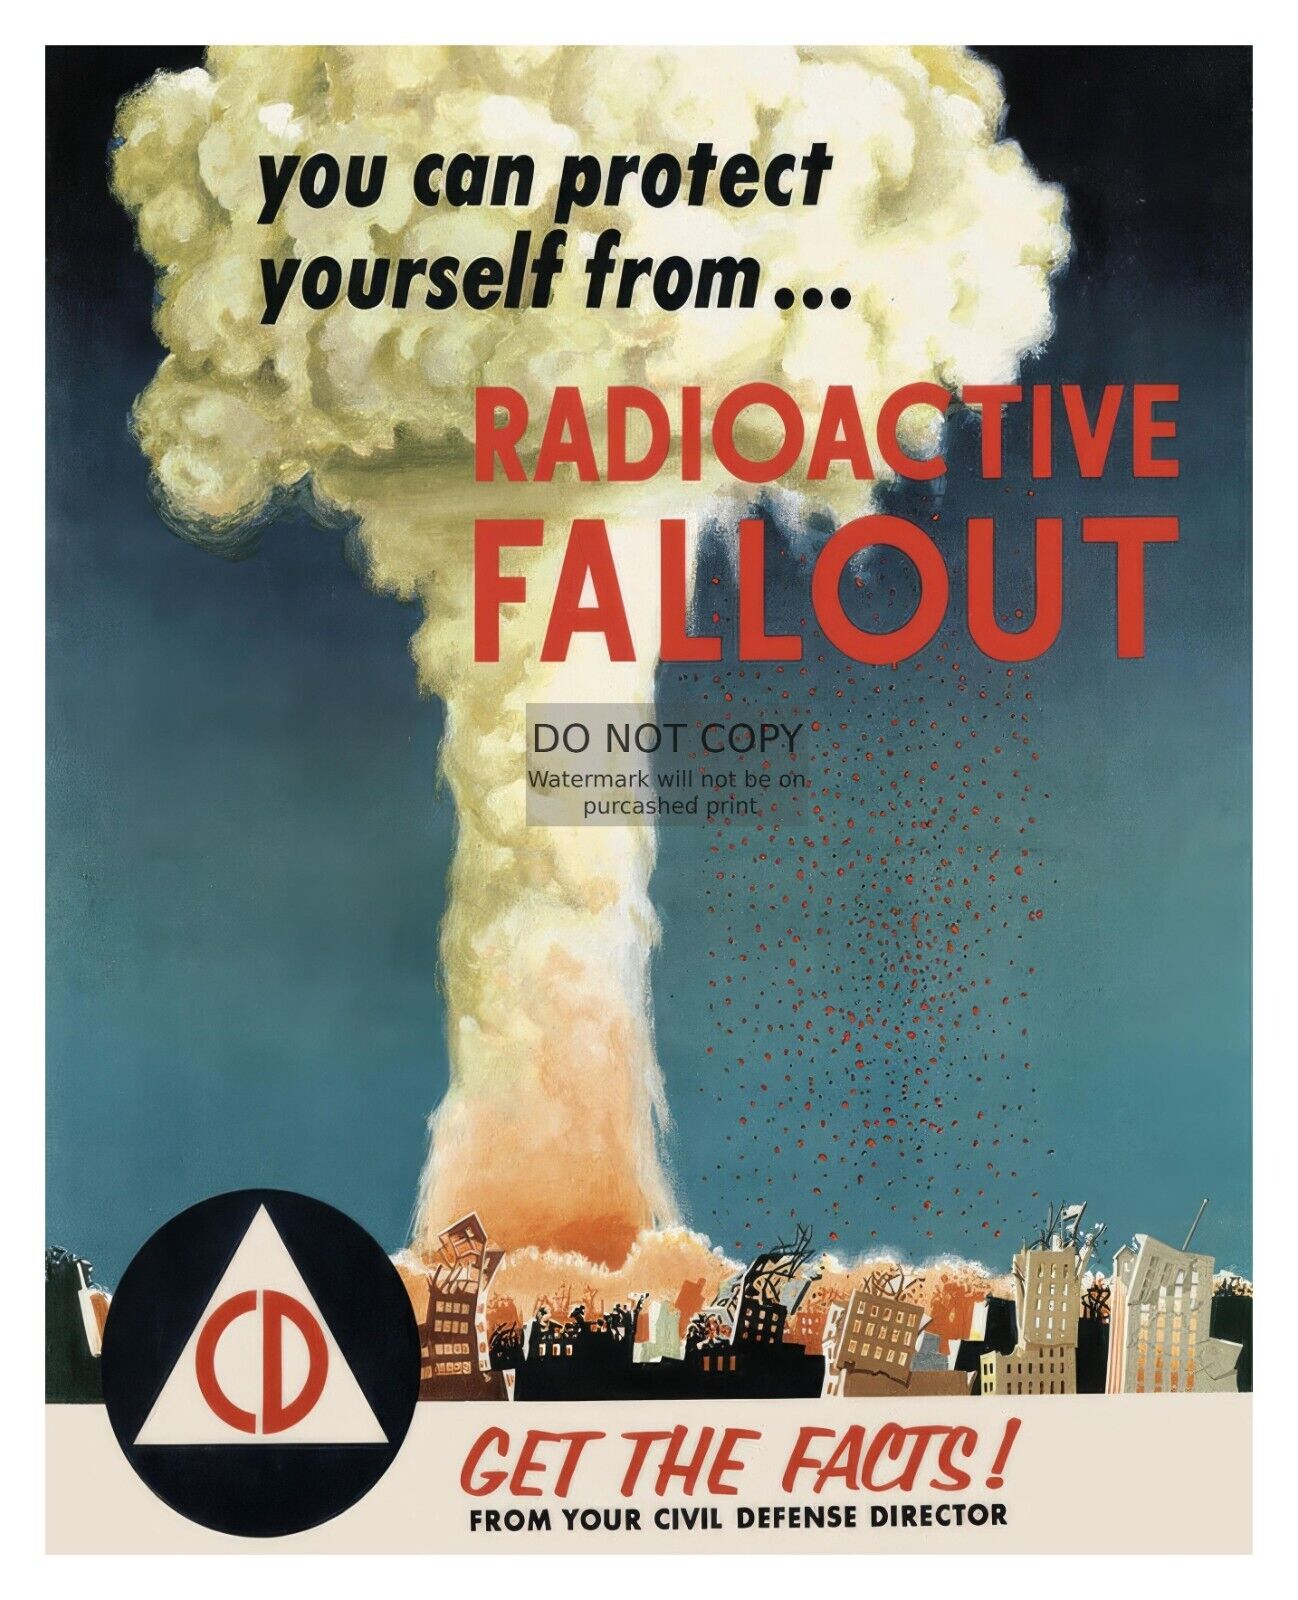 VINTAGE NUCLEAR BOMB RADIOACTIVE FALLOUT CIVIL DEFENSE POSTER 8X10 PHOTO